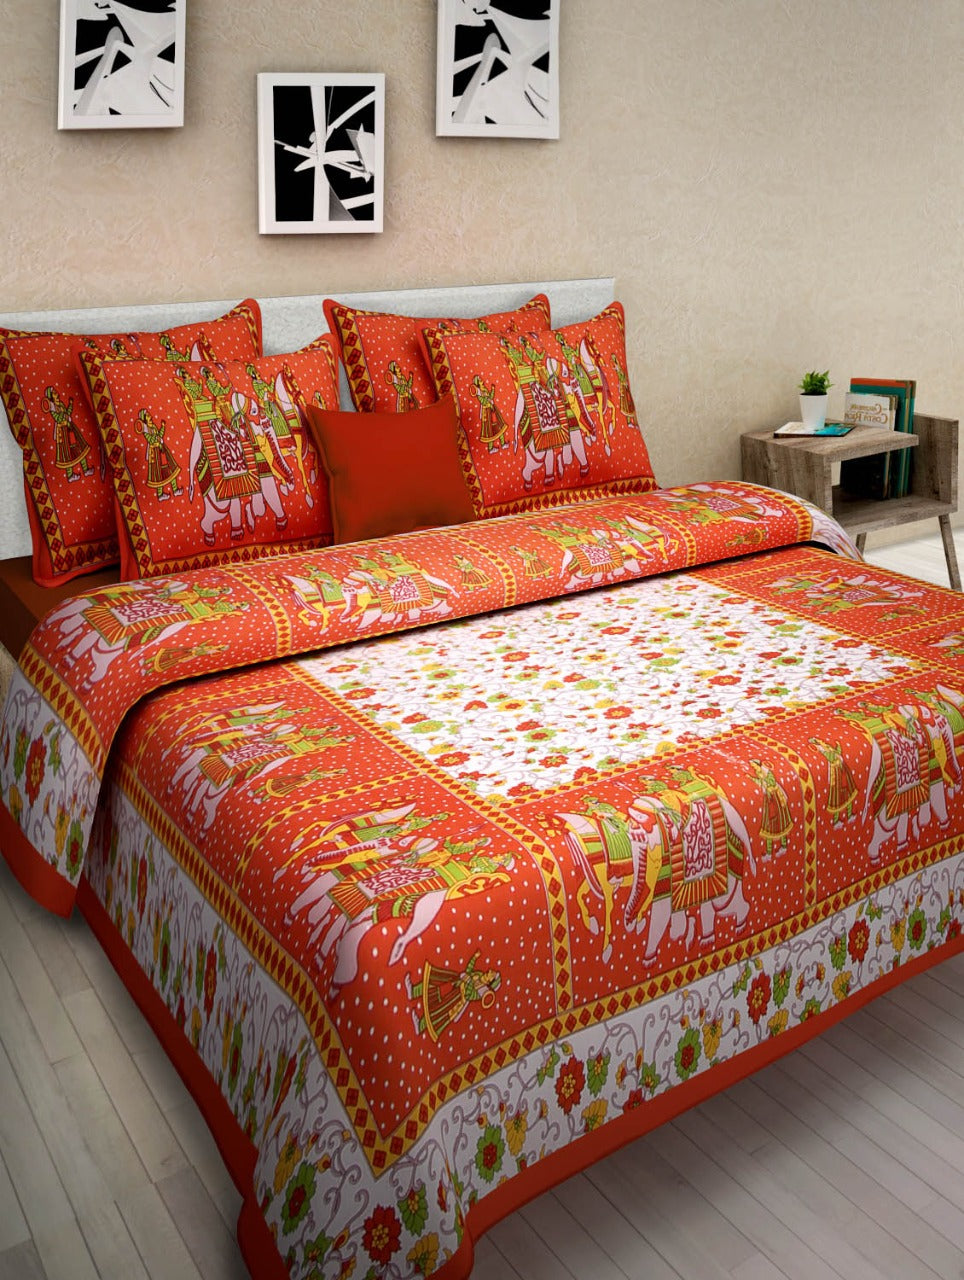 Organic Vibes Orange Baraat Design Cotton Bed Cover with Pillows